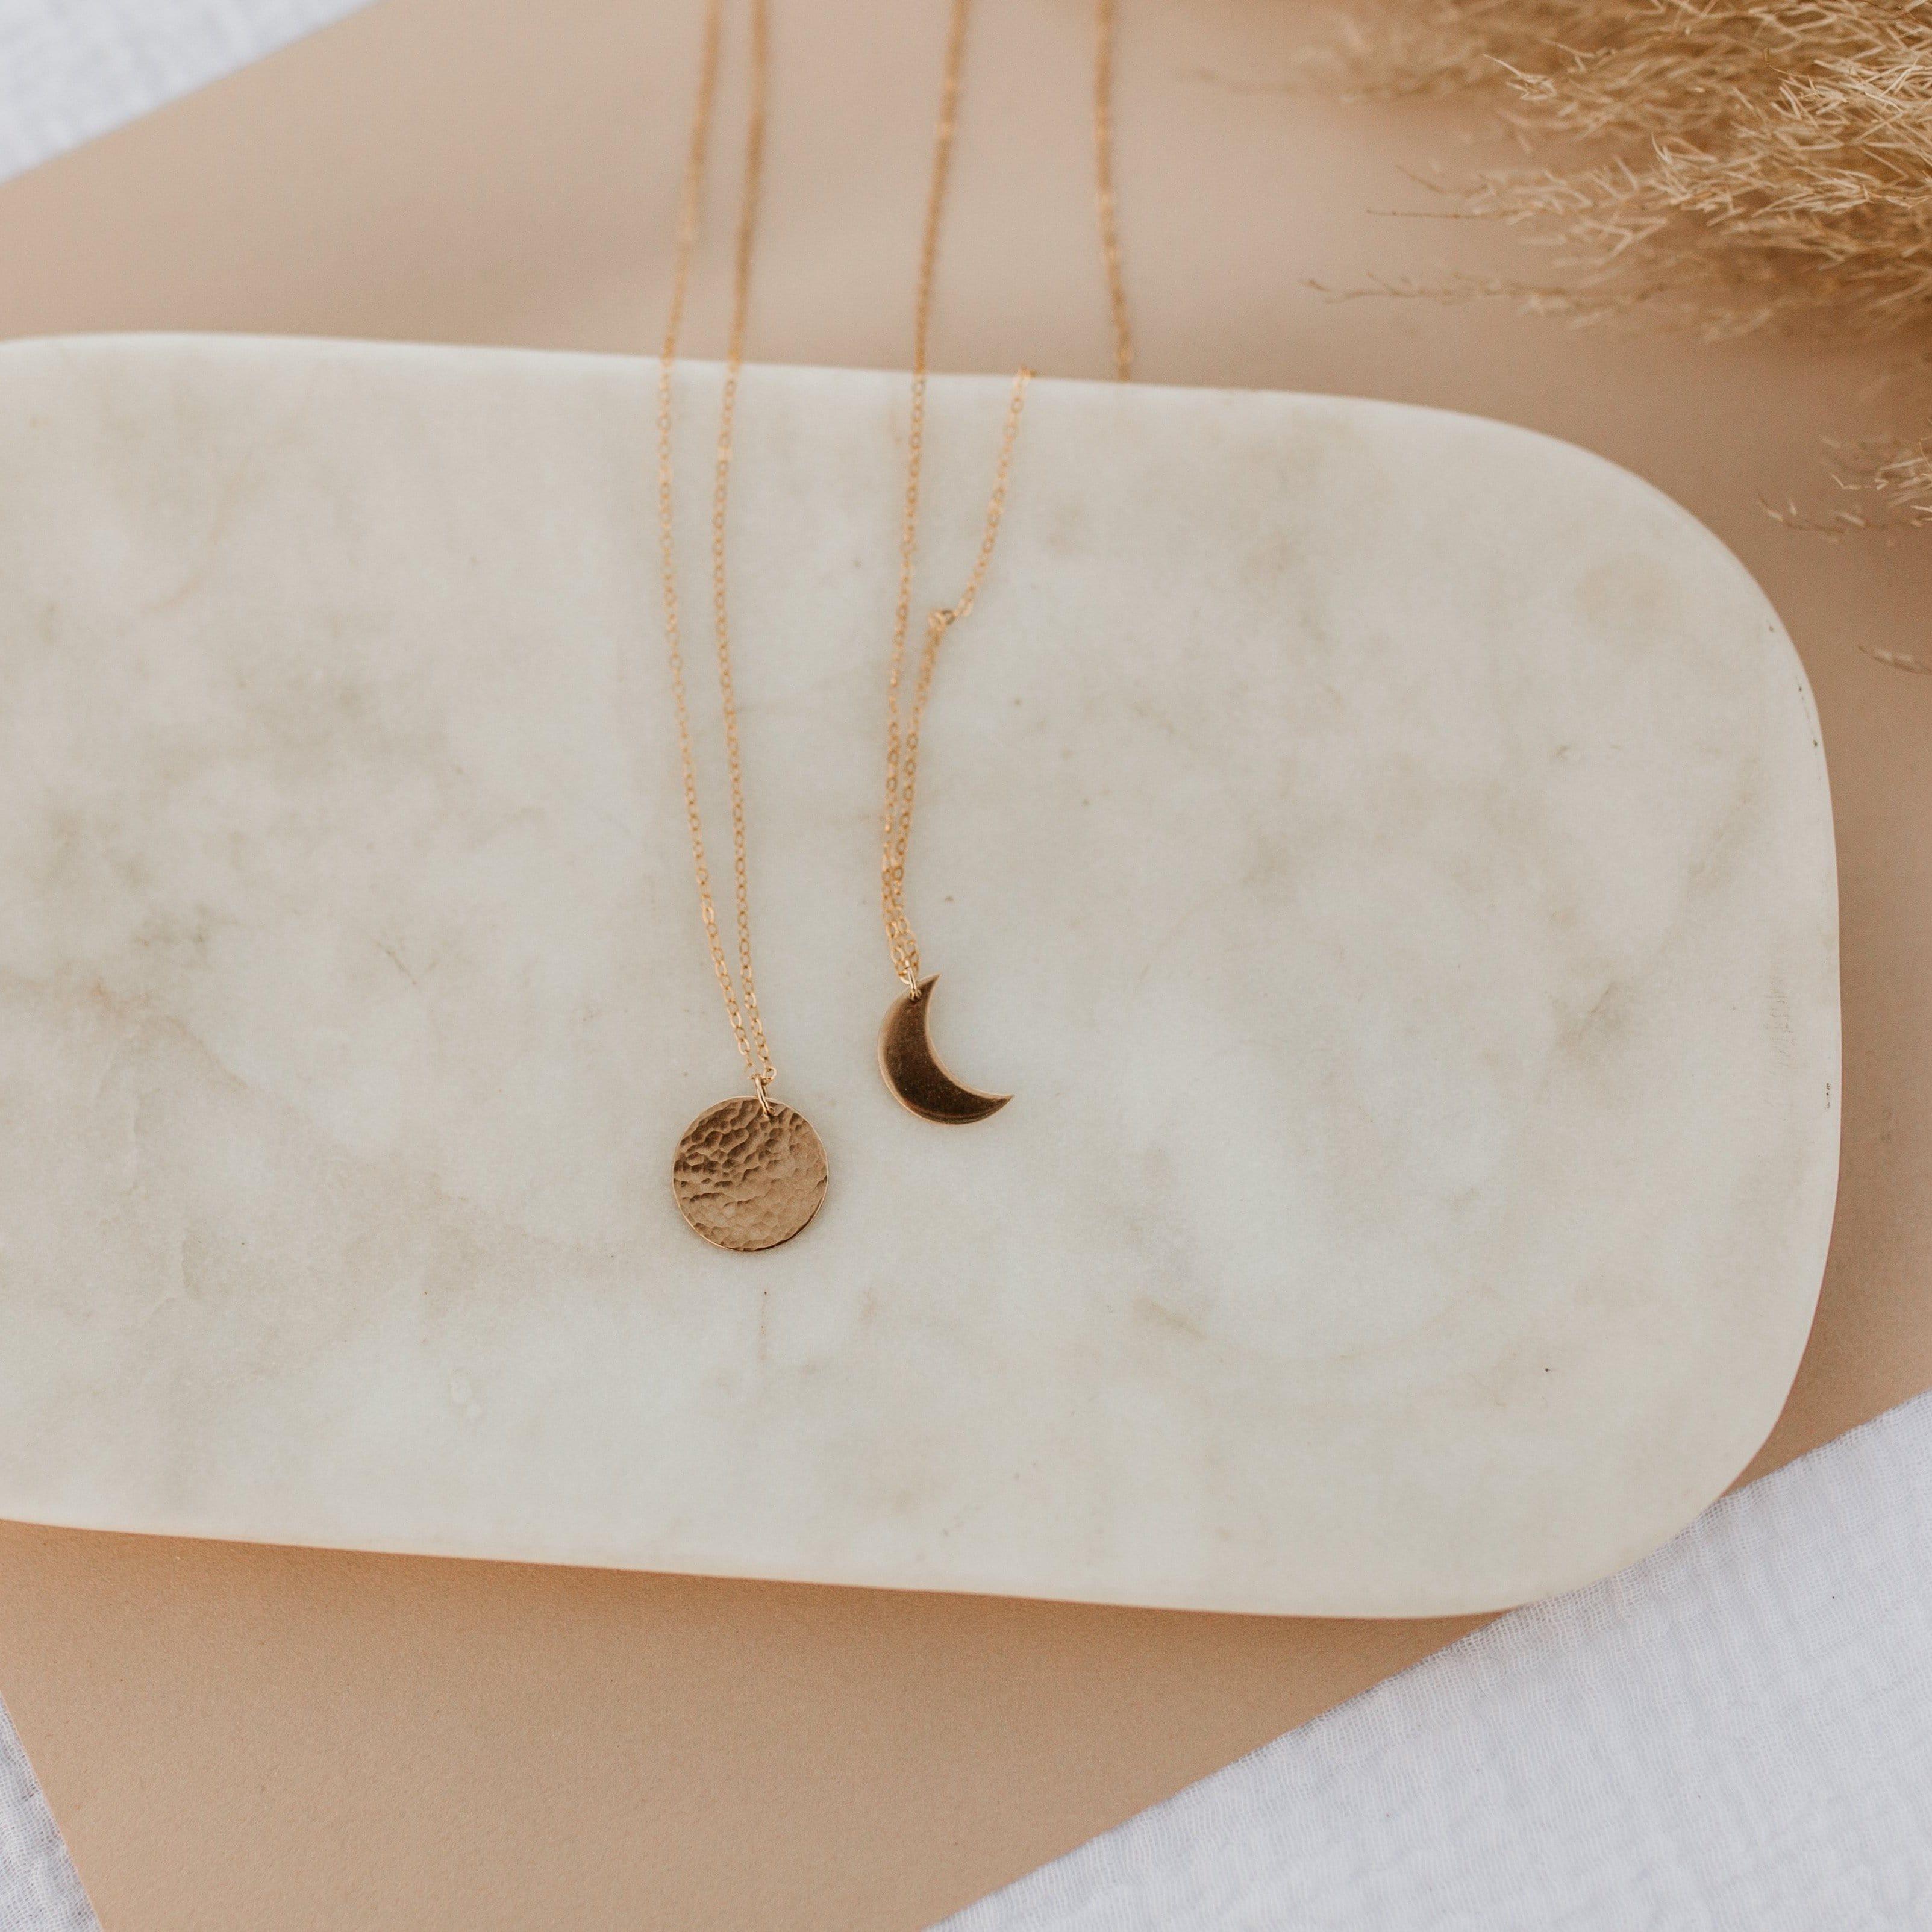 Lunar Phases Necklace - Nolia Jewelry - Meaningful + Sustainably Handcrafted Jewelry